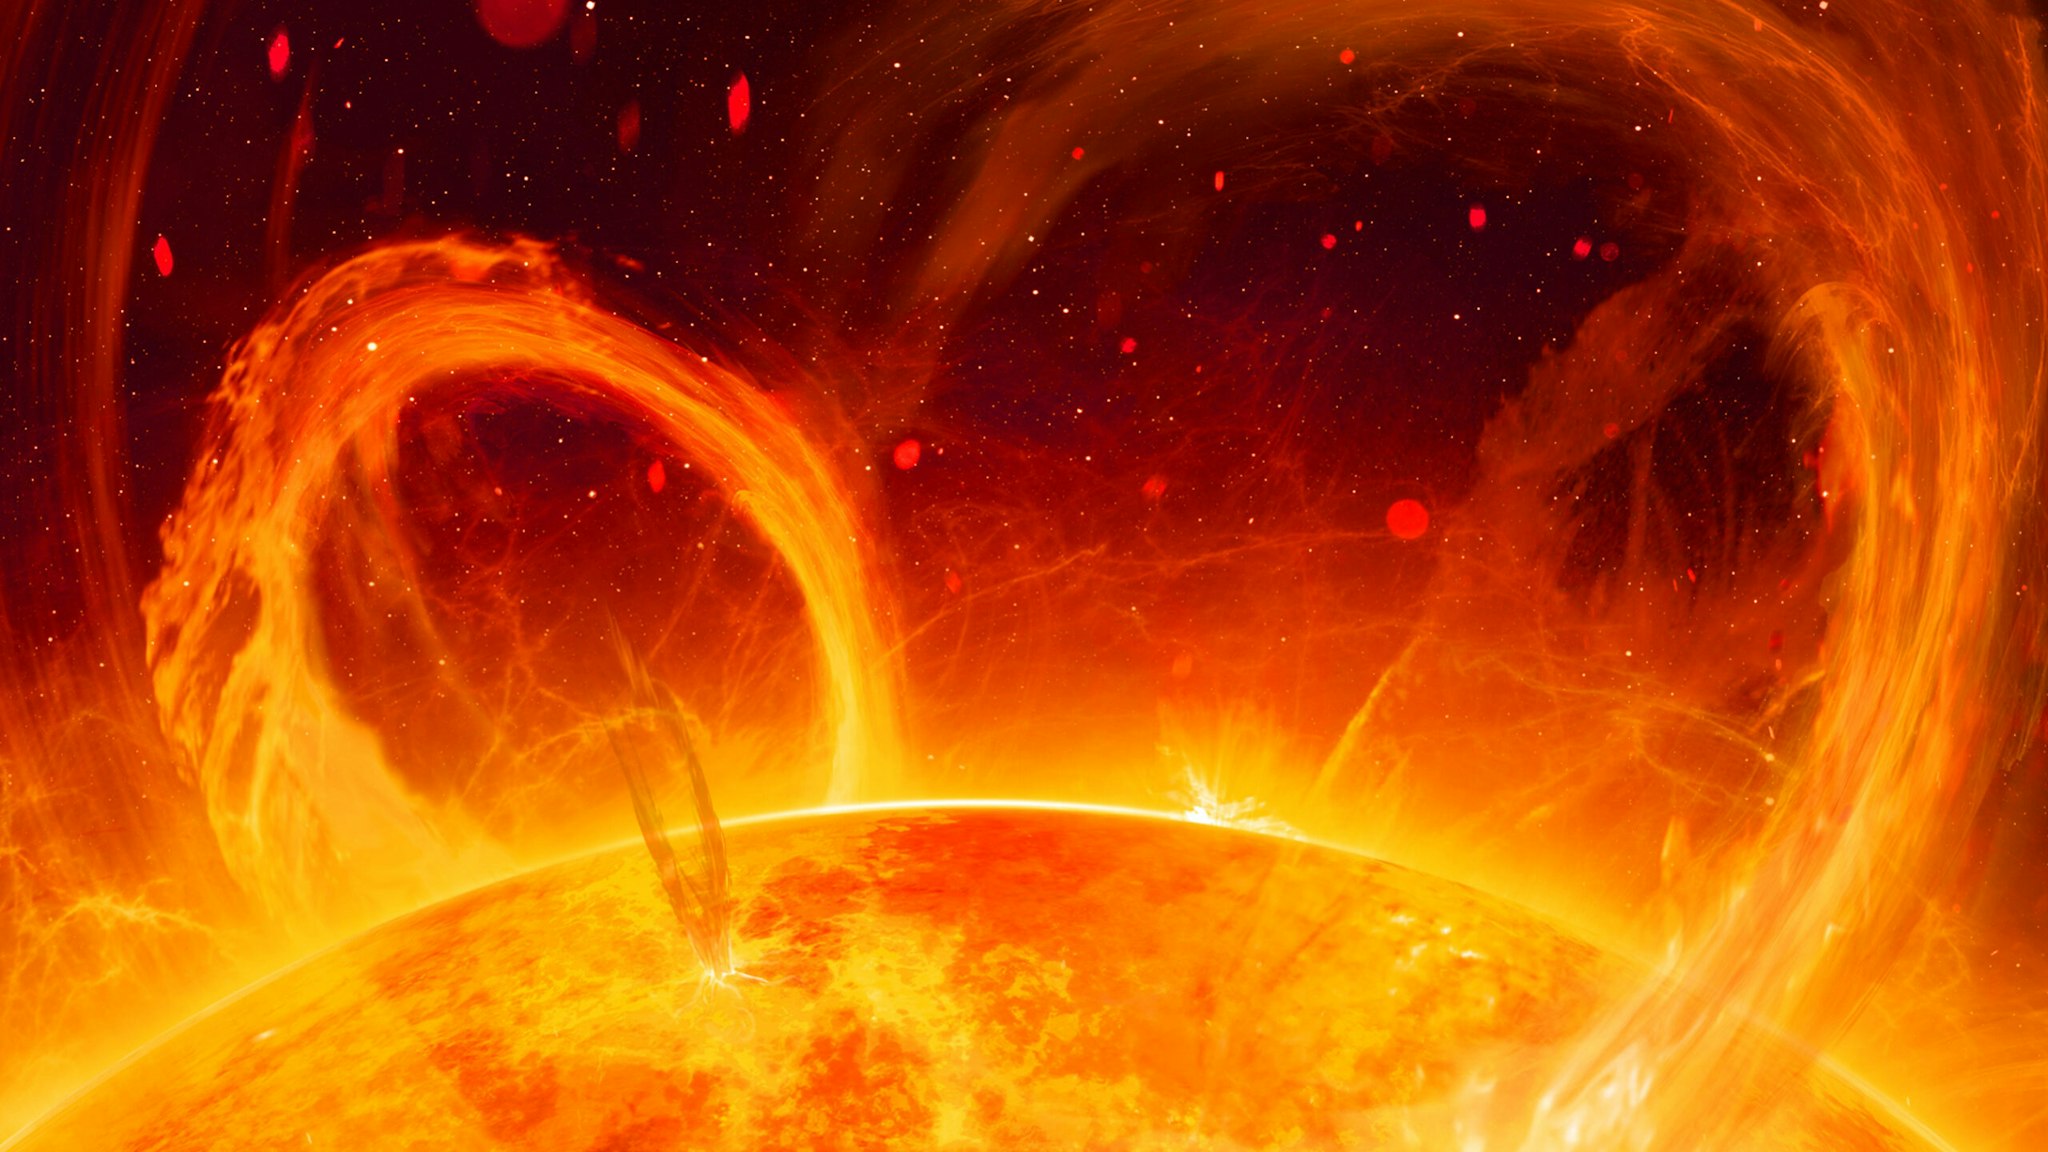 Illustration of solar flares on the surface of the Sun, created on November 14, 2018.